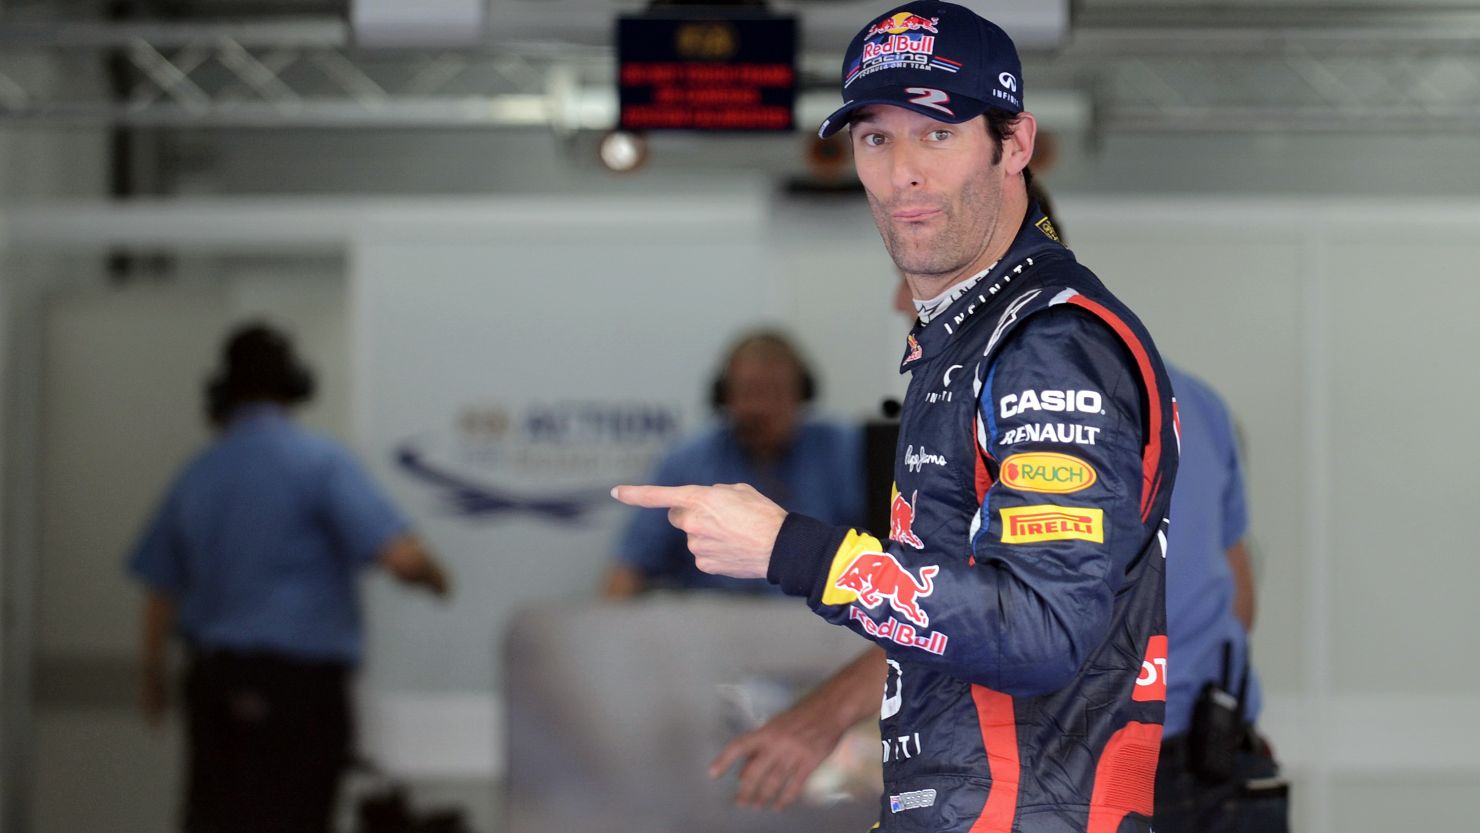 Mark Webber will start the Korean Grand Prix from pole after edging out teammate Sebastian Vettel in Saturday's qualifying.